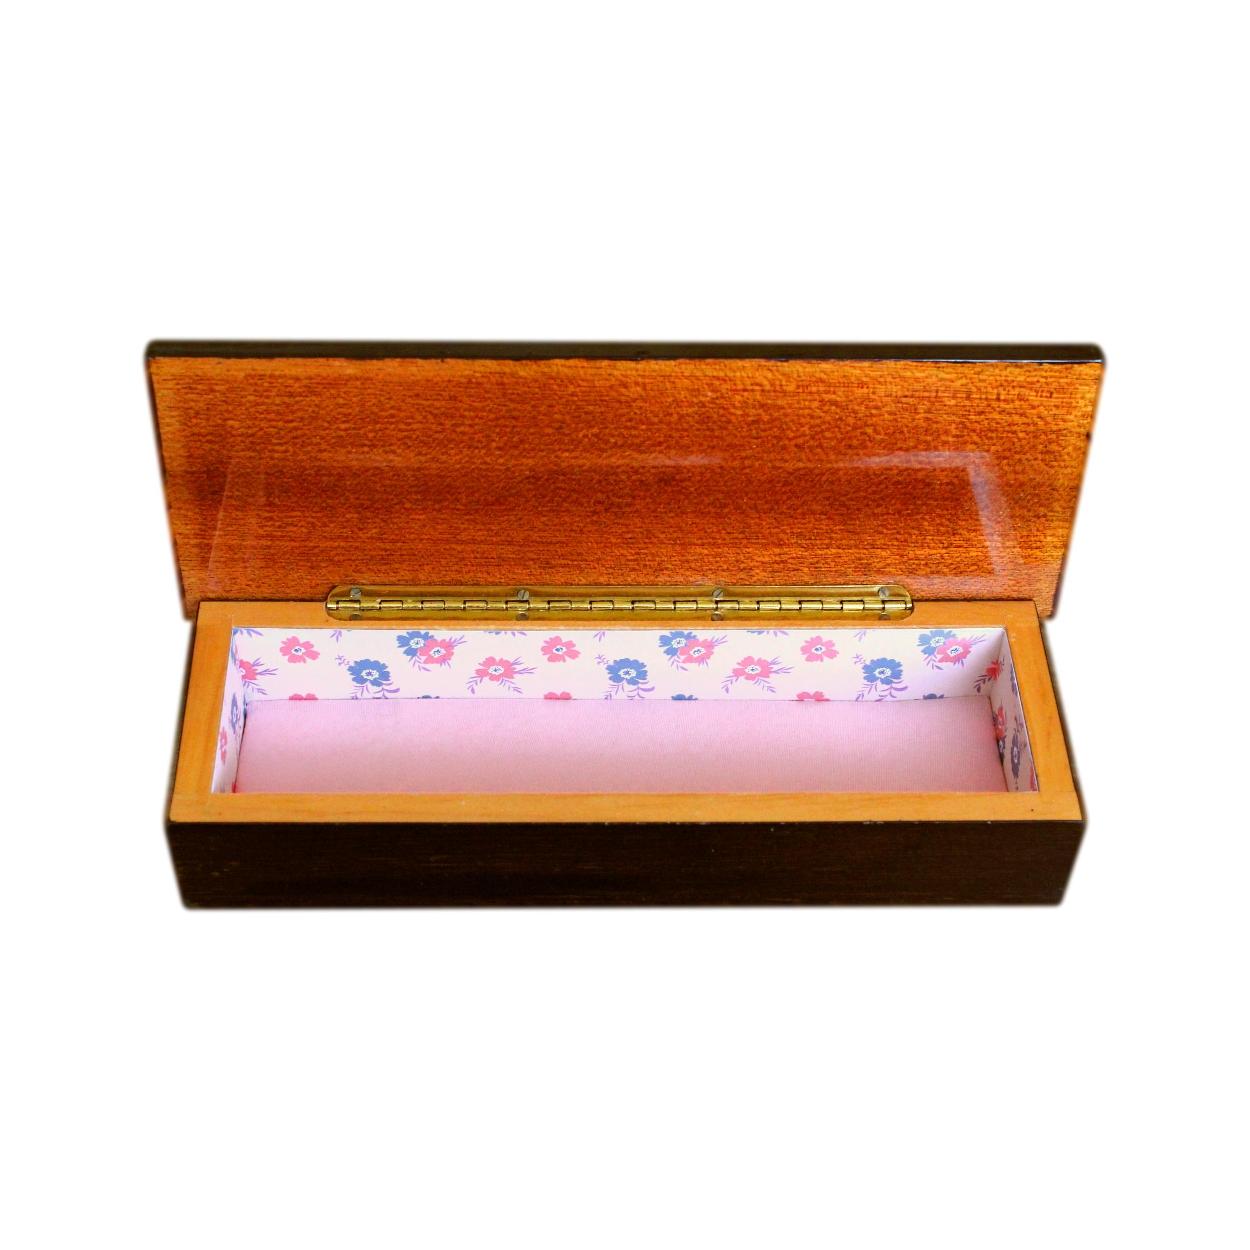 Newly lined vintage jewellery box